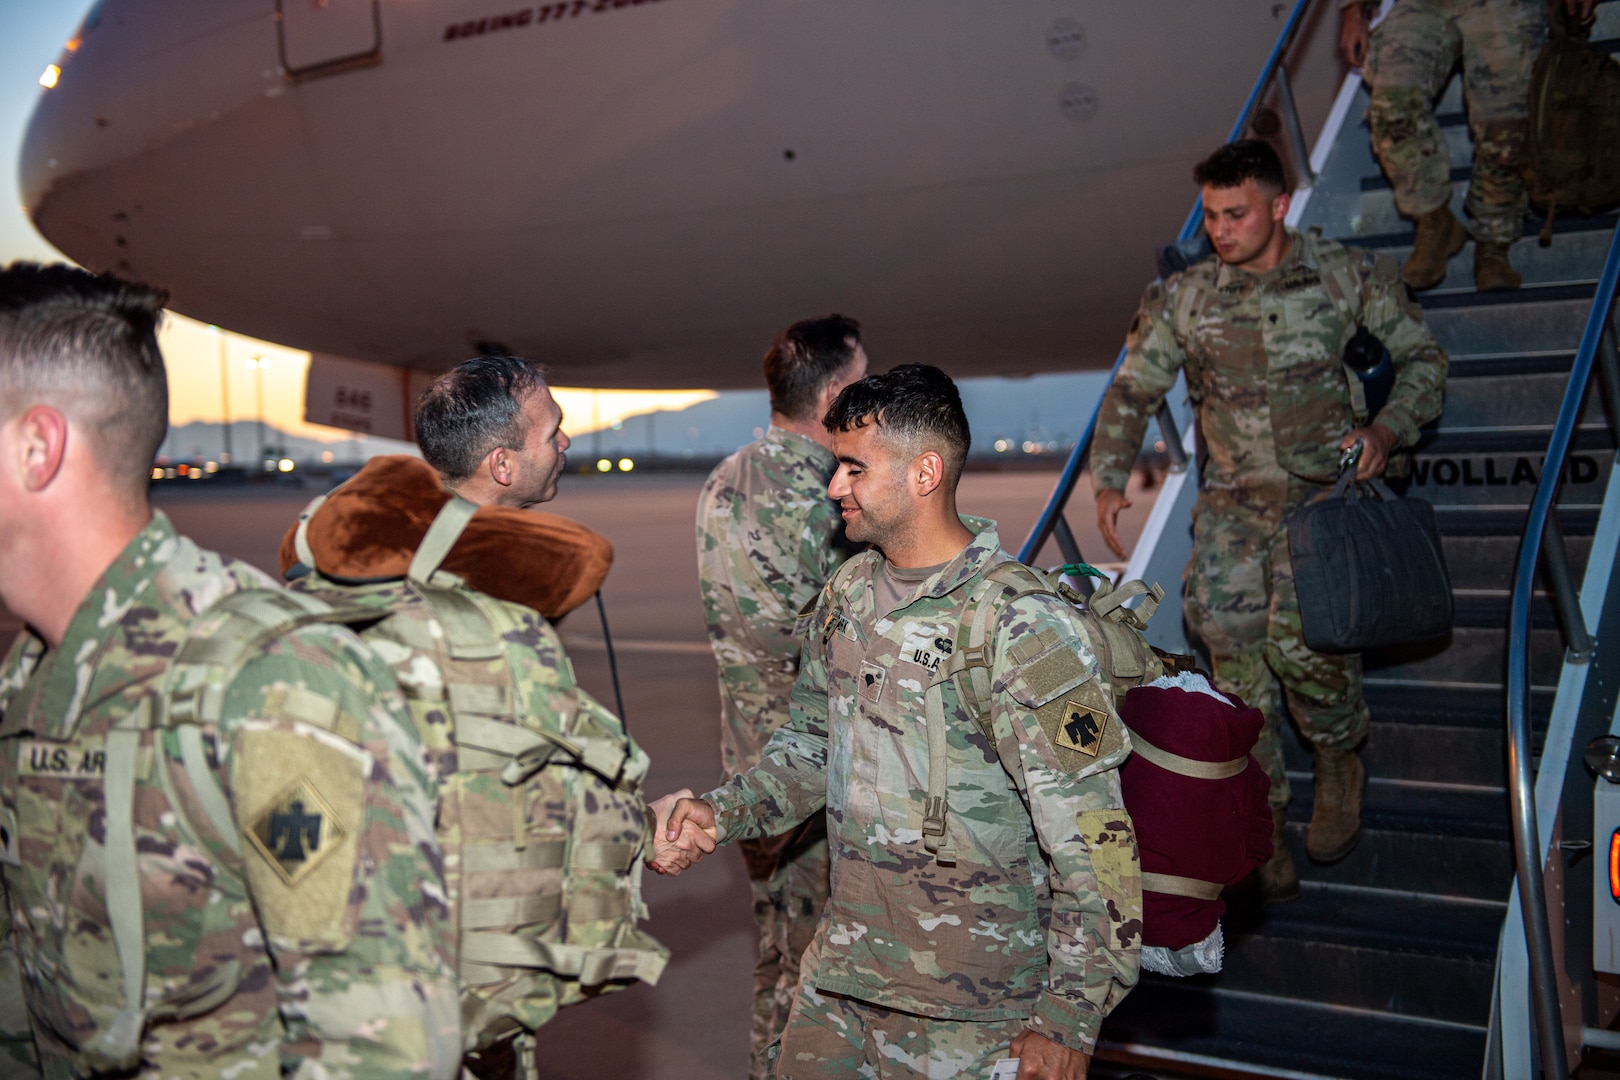 Members of Task Force Tomahawk arrive at Fort Bliss, Texas, Feb. 18, 2024, for demobilization following a nine-month deployment to the Horn of Africa. Task Force Tomahawk is made up of units of the 45th Infantry Brigade Combat Team - primarily of the 1st Battalion, 179th Infantry Regiment as well as companies from the 1st Battalion, 279th Infantry Regiment and 2nd Battalion, 134th Infantry Regiment (Airborne). TF Tomahawk was responsible for security at multiple locations across several countries in the Horn of Africa as well as manning the East African Response Force. (Oklahoma National Guard photo by Anthony Jones)